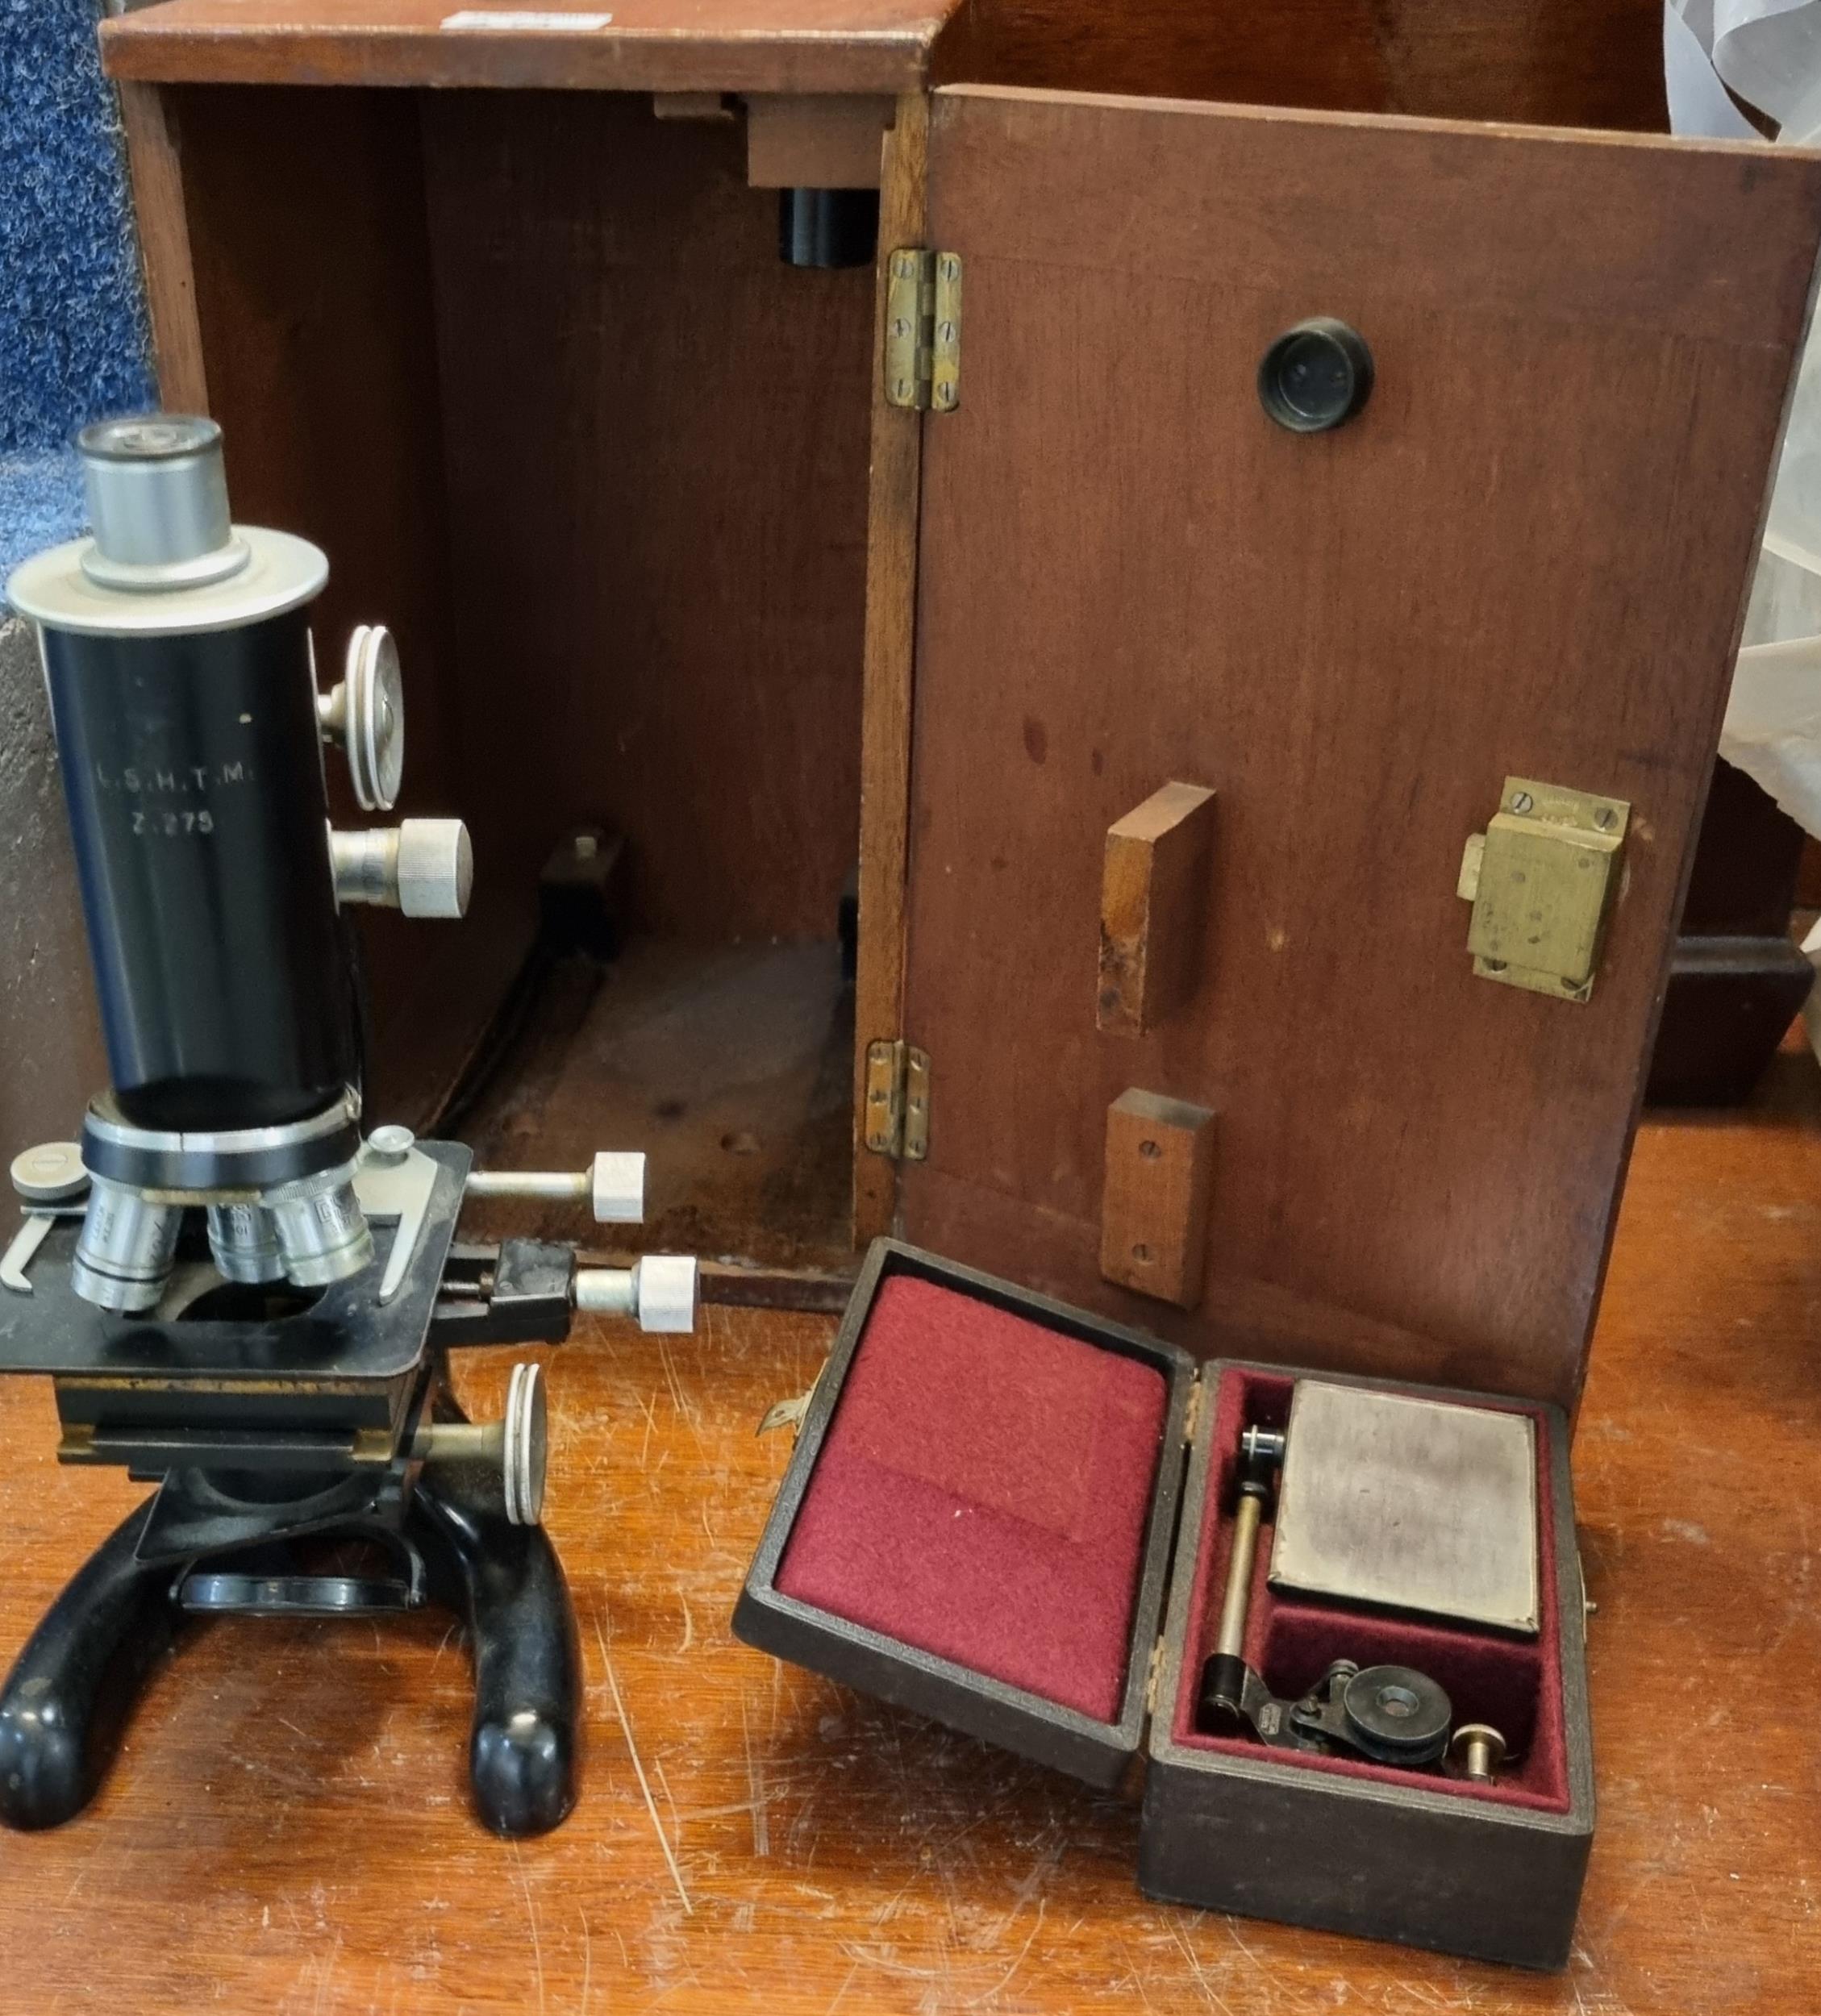 20th century Beck of London microscope in fitted mahogany box. (B.P. 21% + VAT)